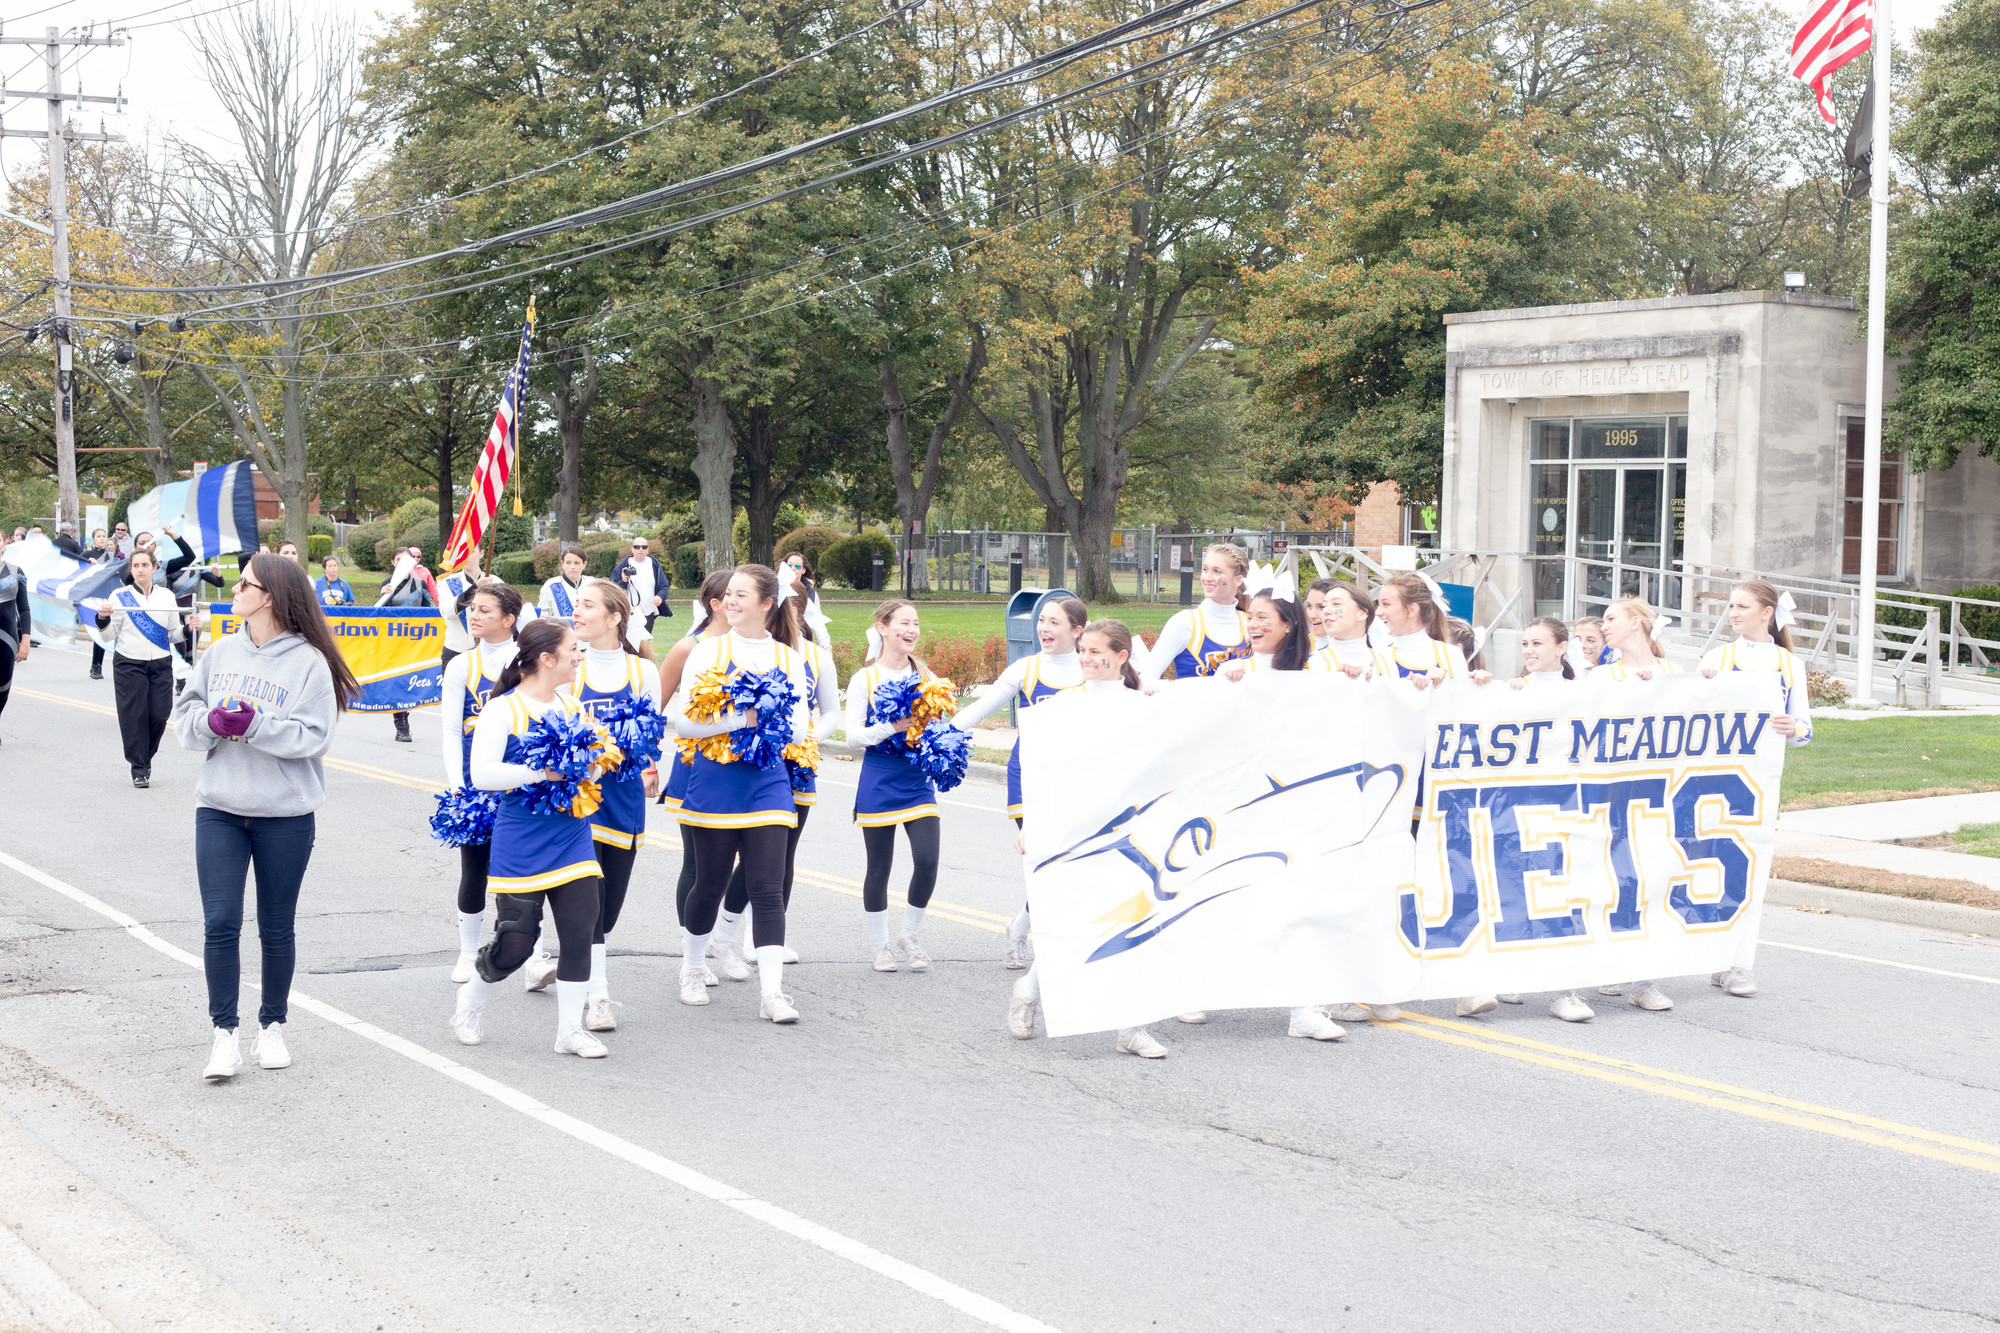 East meadow High School cheerleaders led the parade’s procession from Veterans Memorial Park to the high school last Saturday.